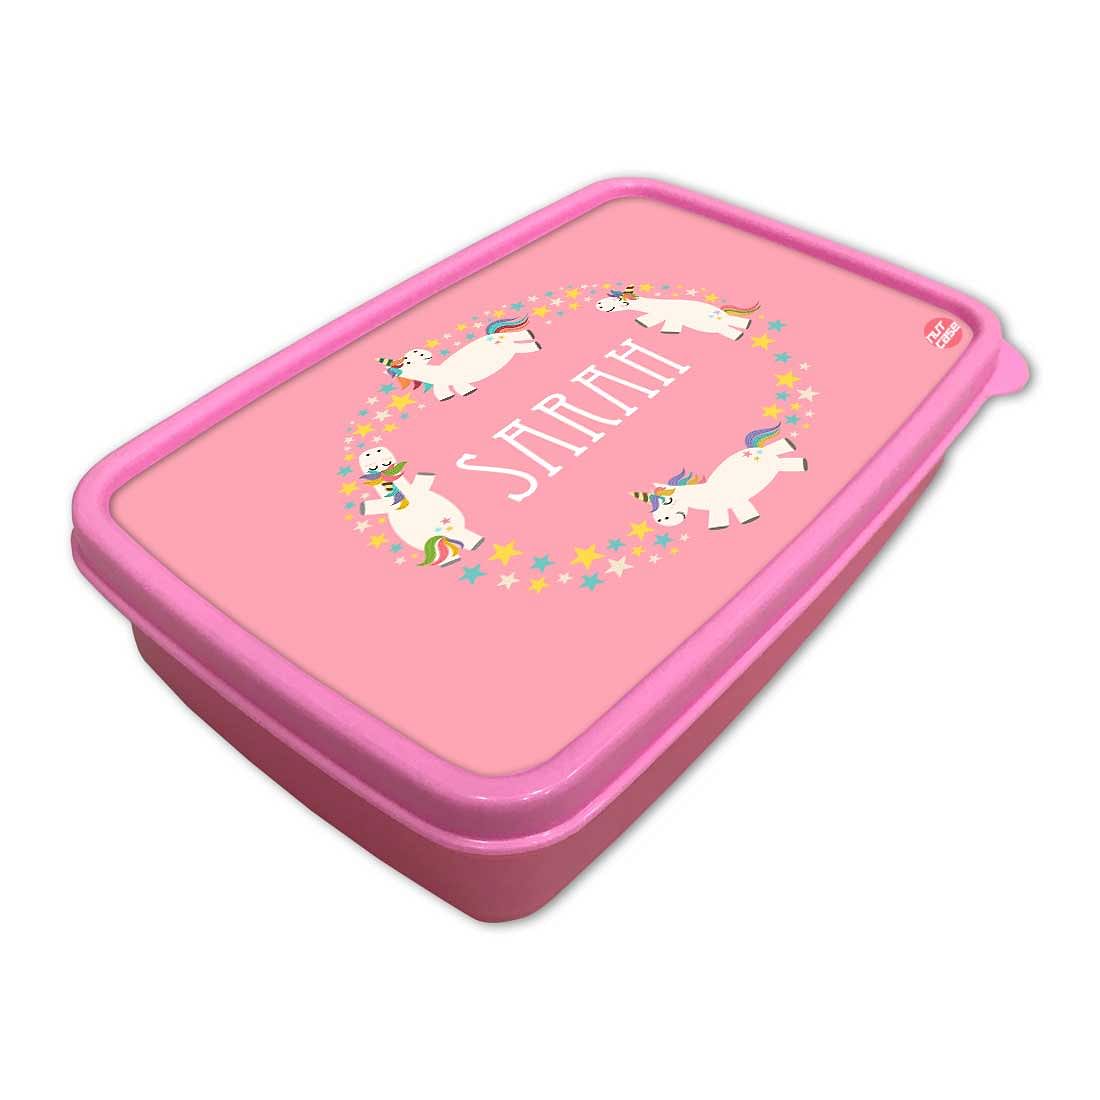 Personalized Lunch Box for Kids Plastic Lunch Box Girls -White Unicorn Nutcase